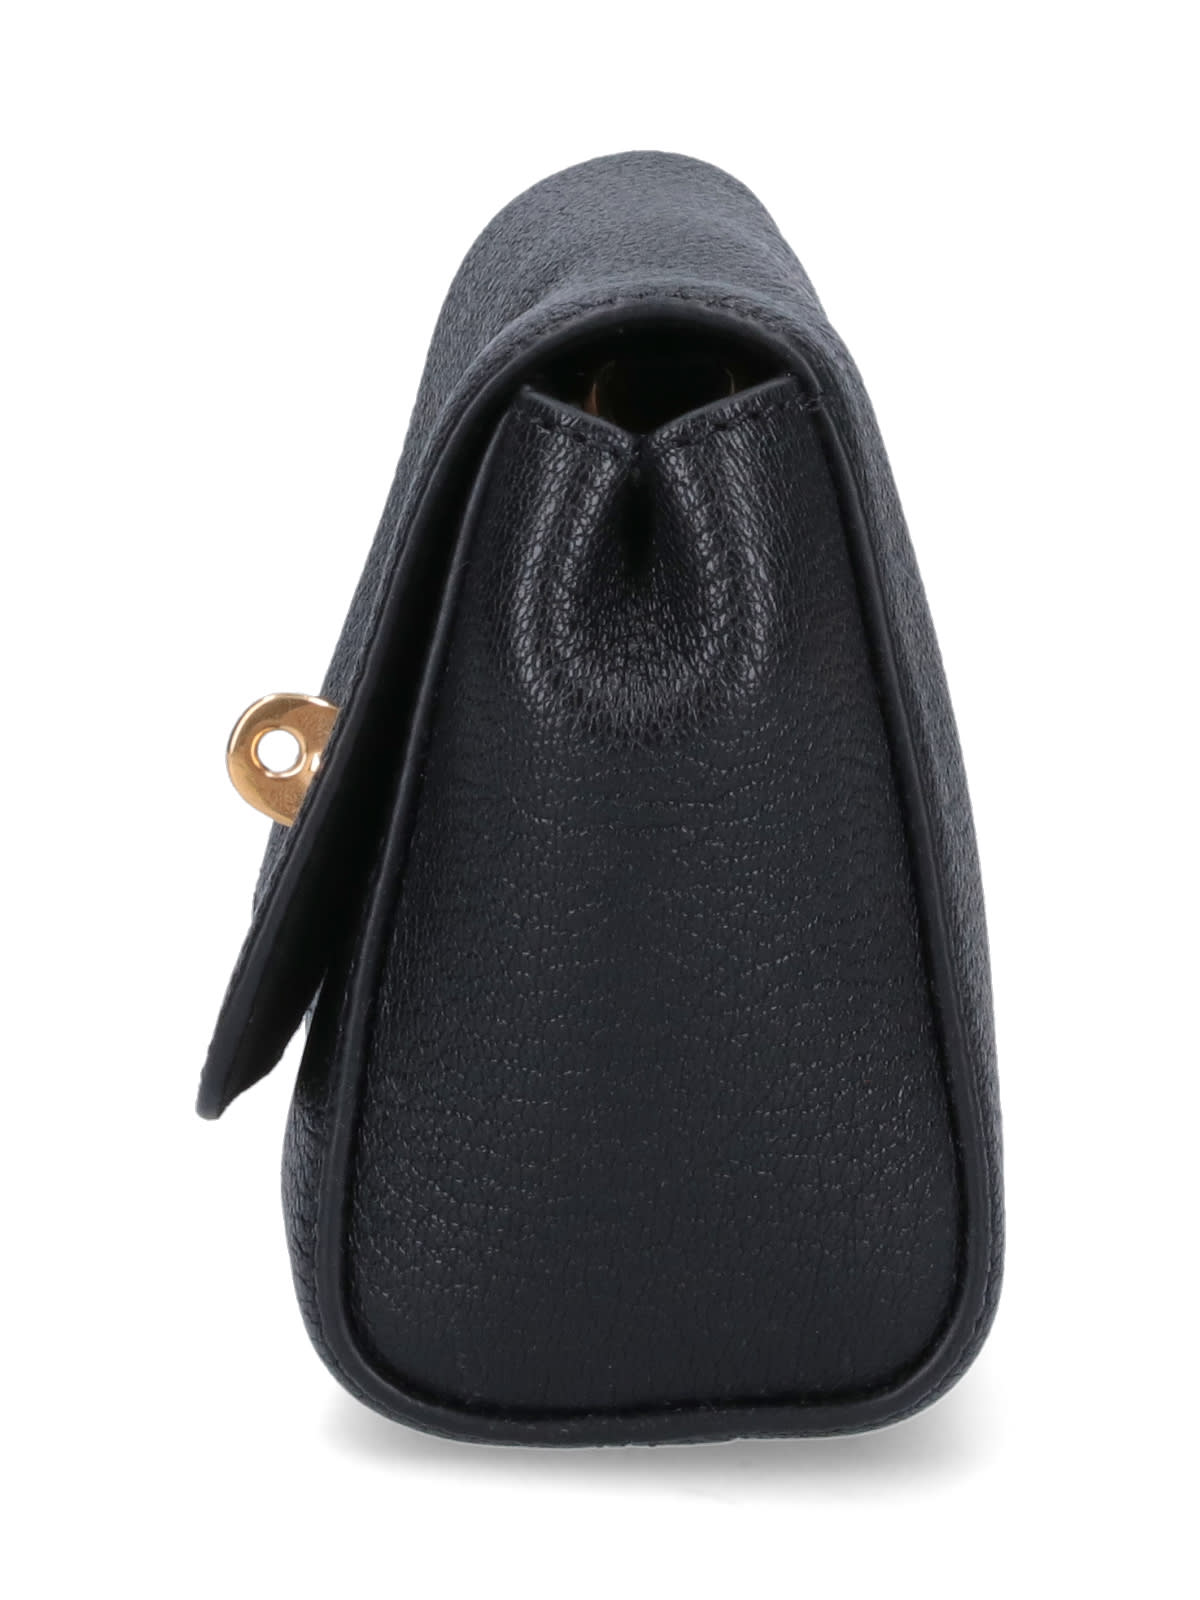 Shop Mulberry Mini Lily Bag In Black